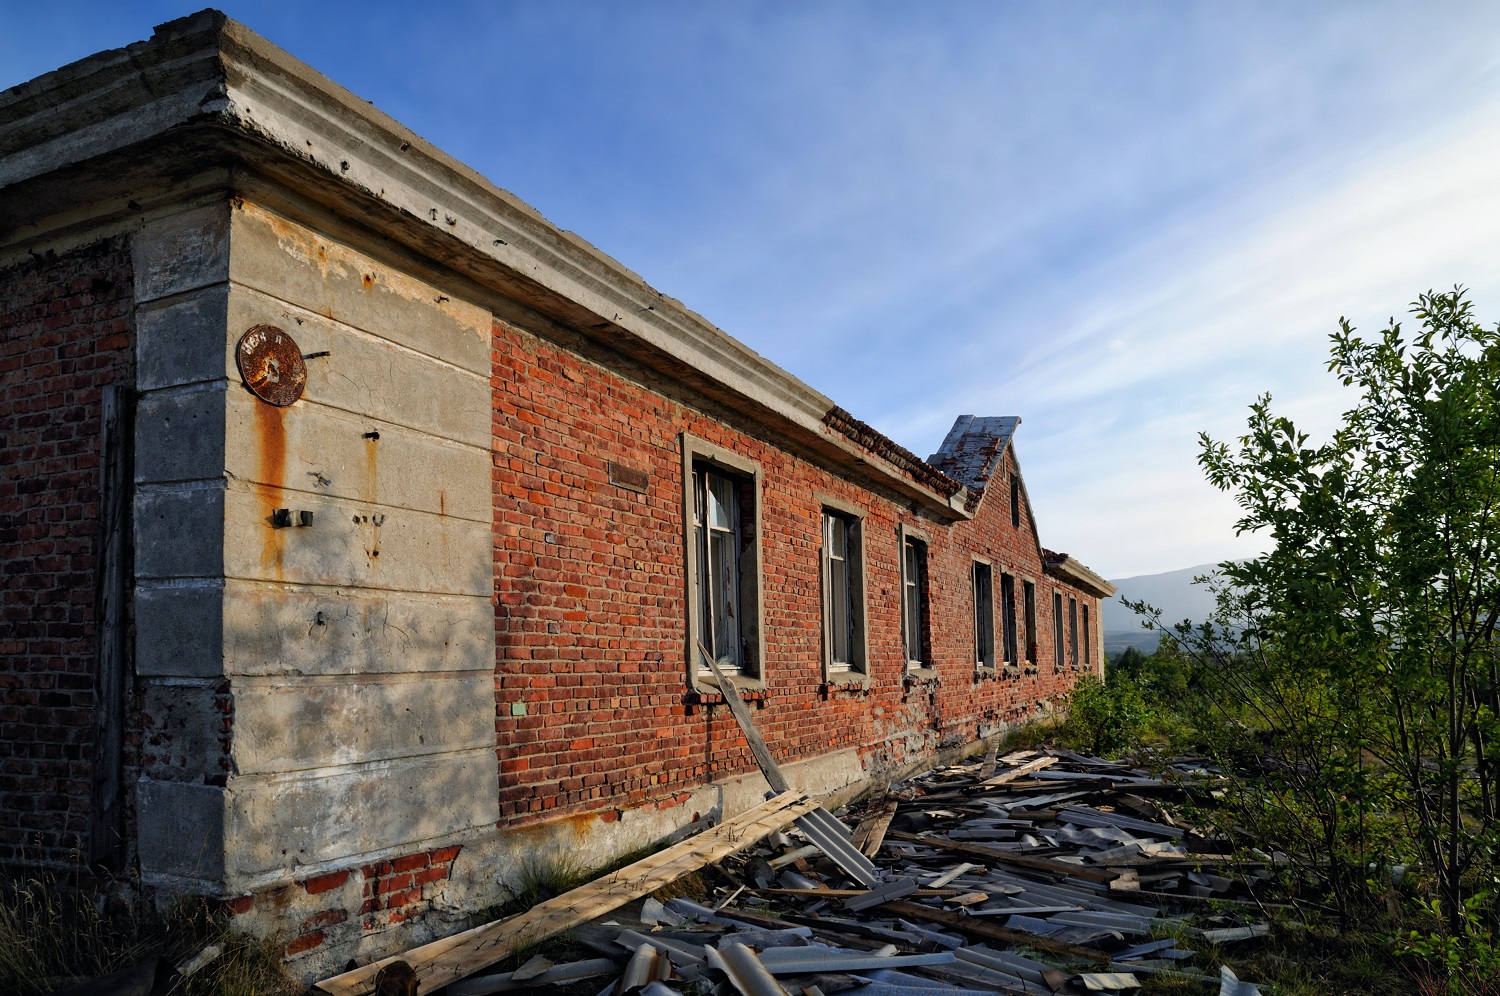 Municipalities can turn abandoned properties into business spaces